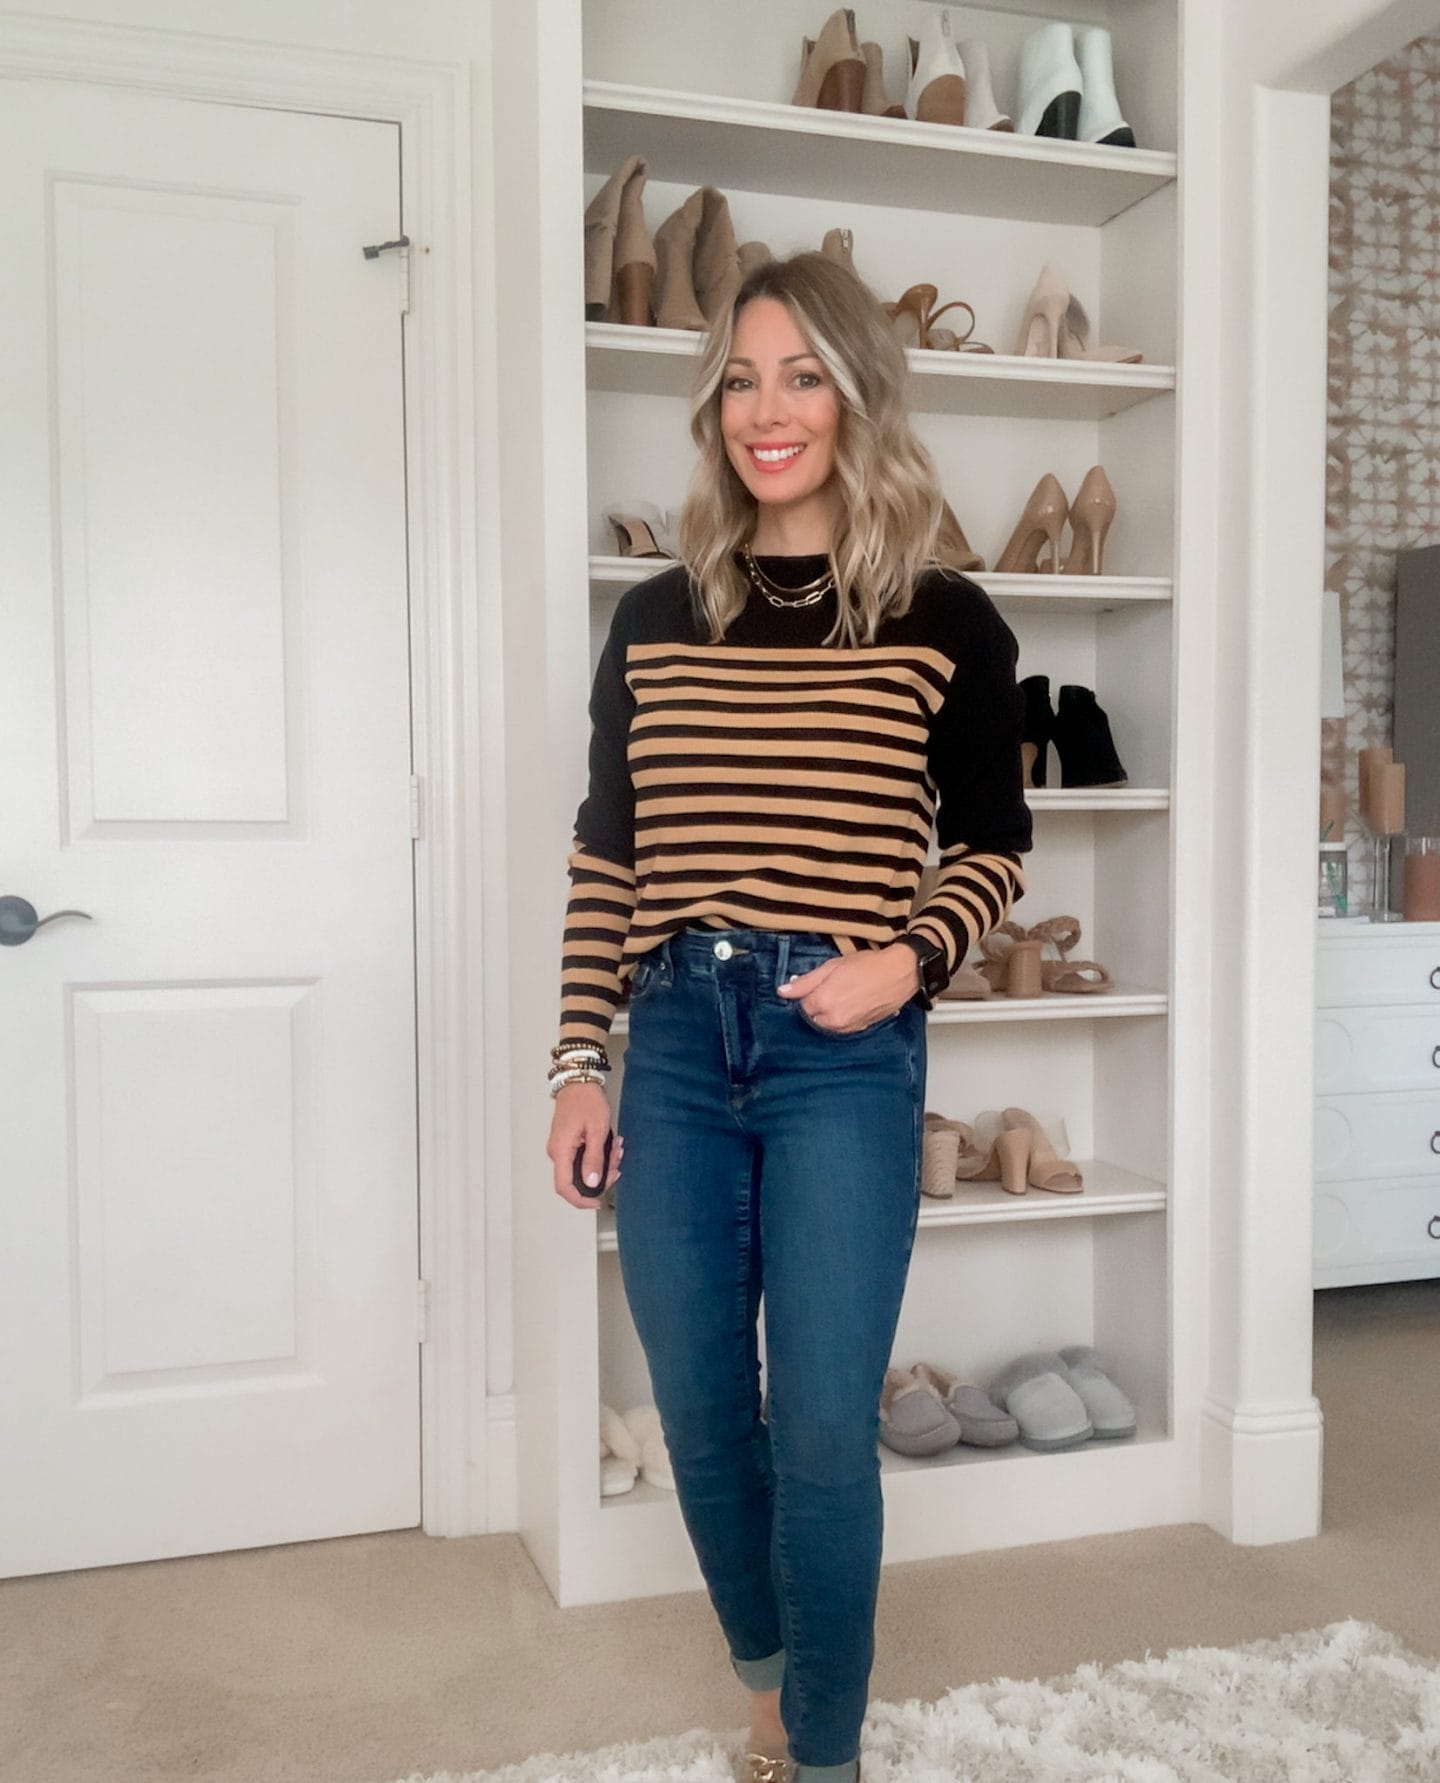 Dressing Room Finds, Striped Sweater, Jeans, Mules 